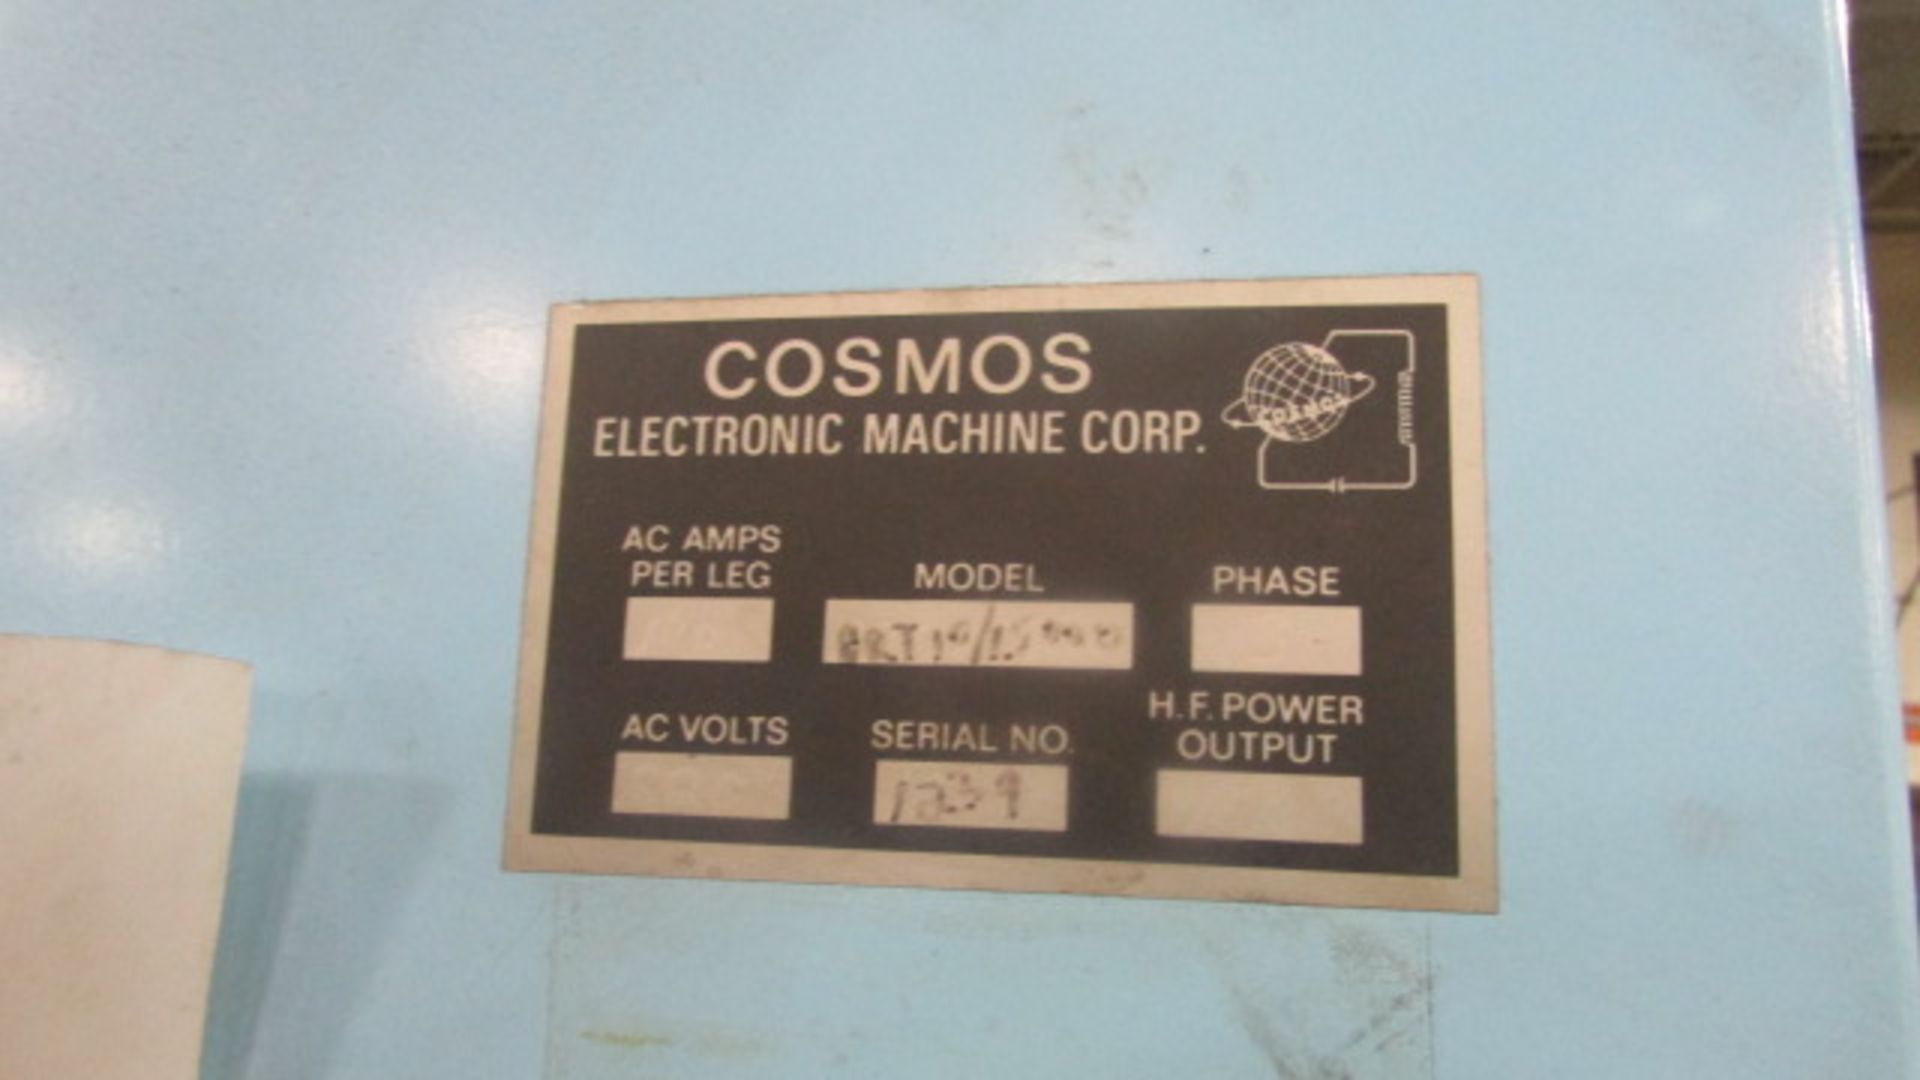 Cosmos 4-Station 96" Turntable, 3-Phase, m/n GRT10/15000, s/n 12-39/15KW - Image 3 of 3